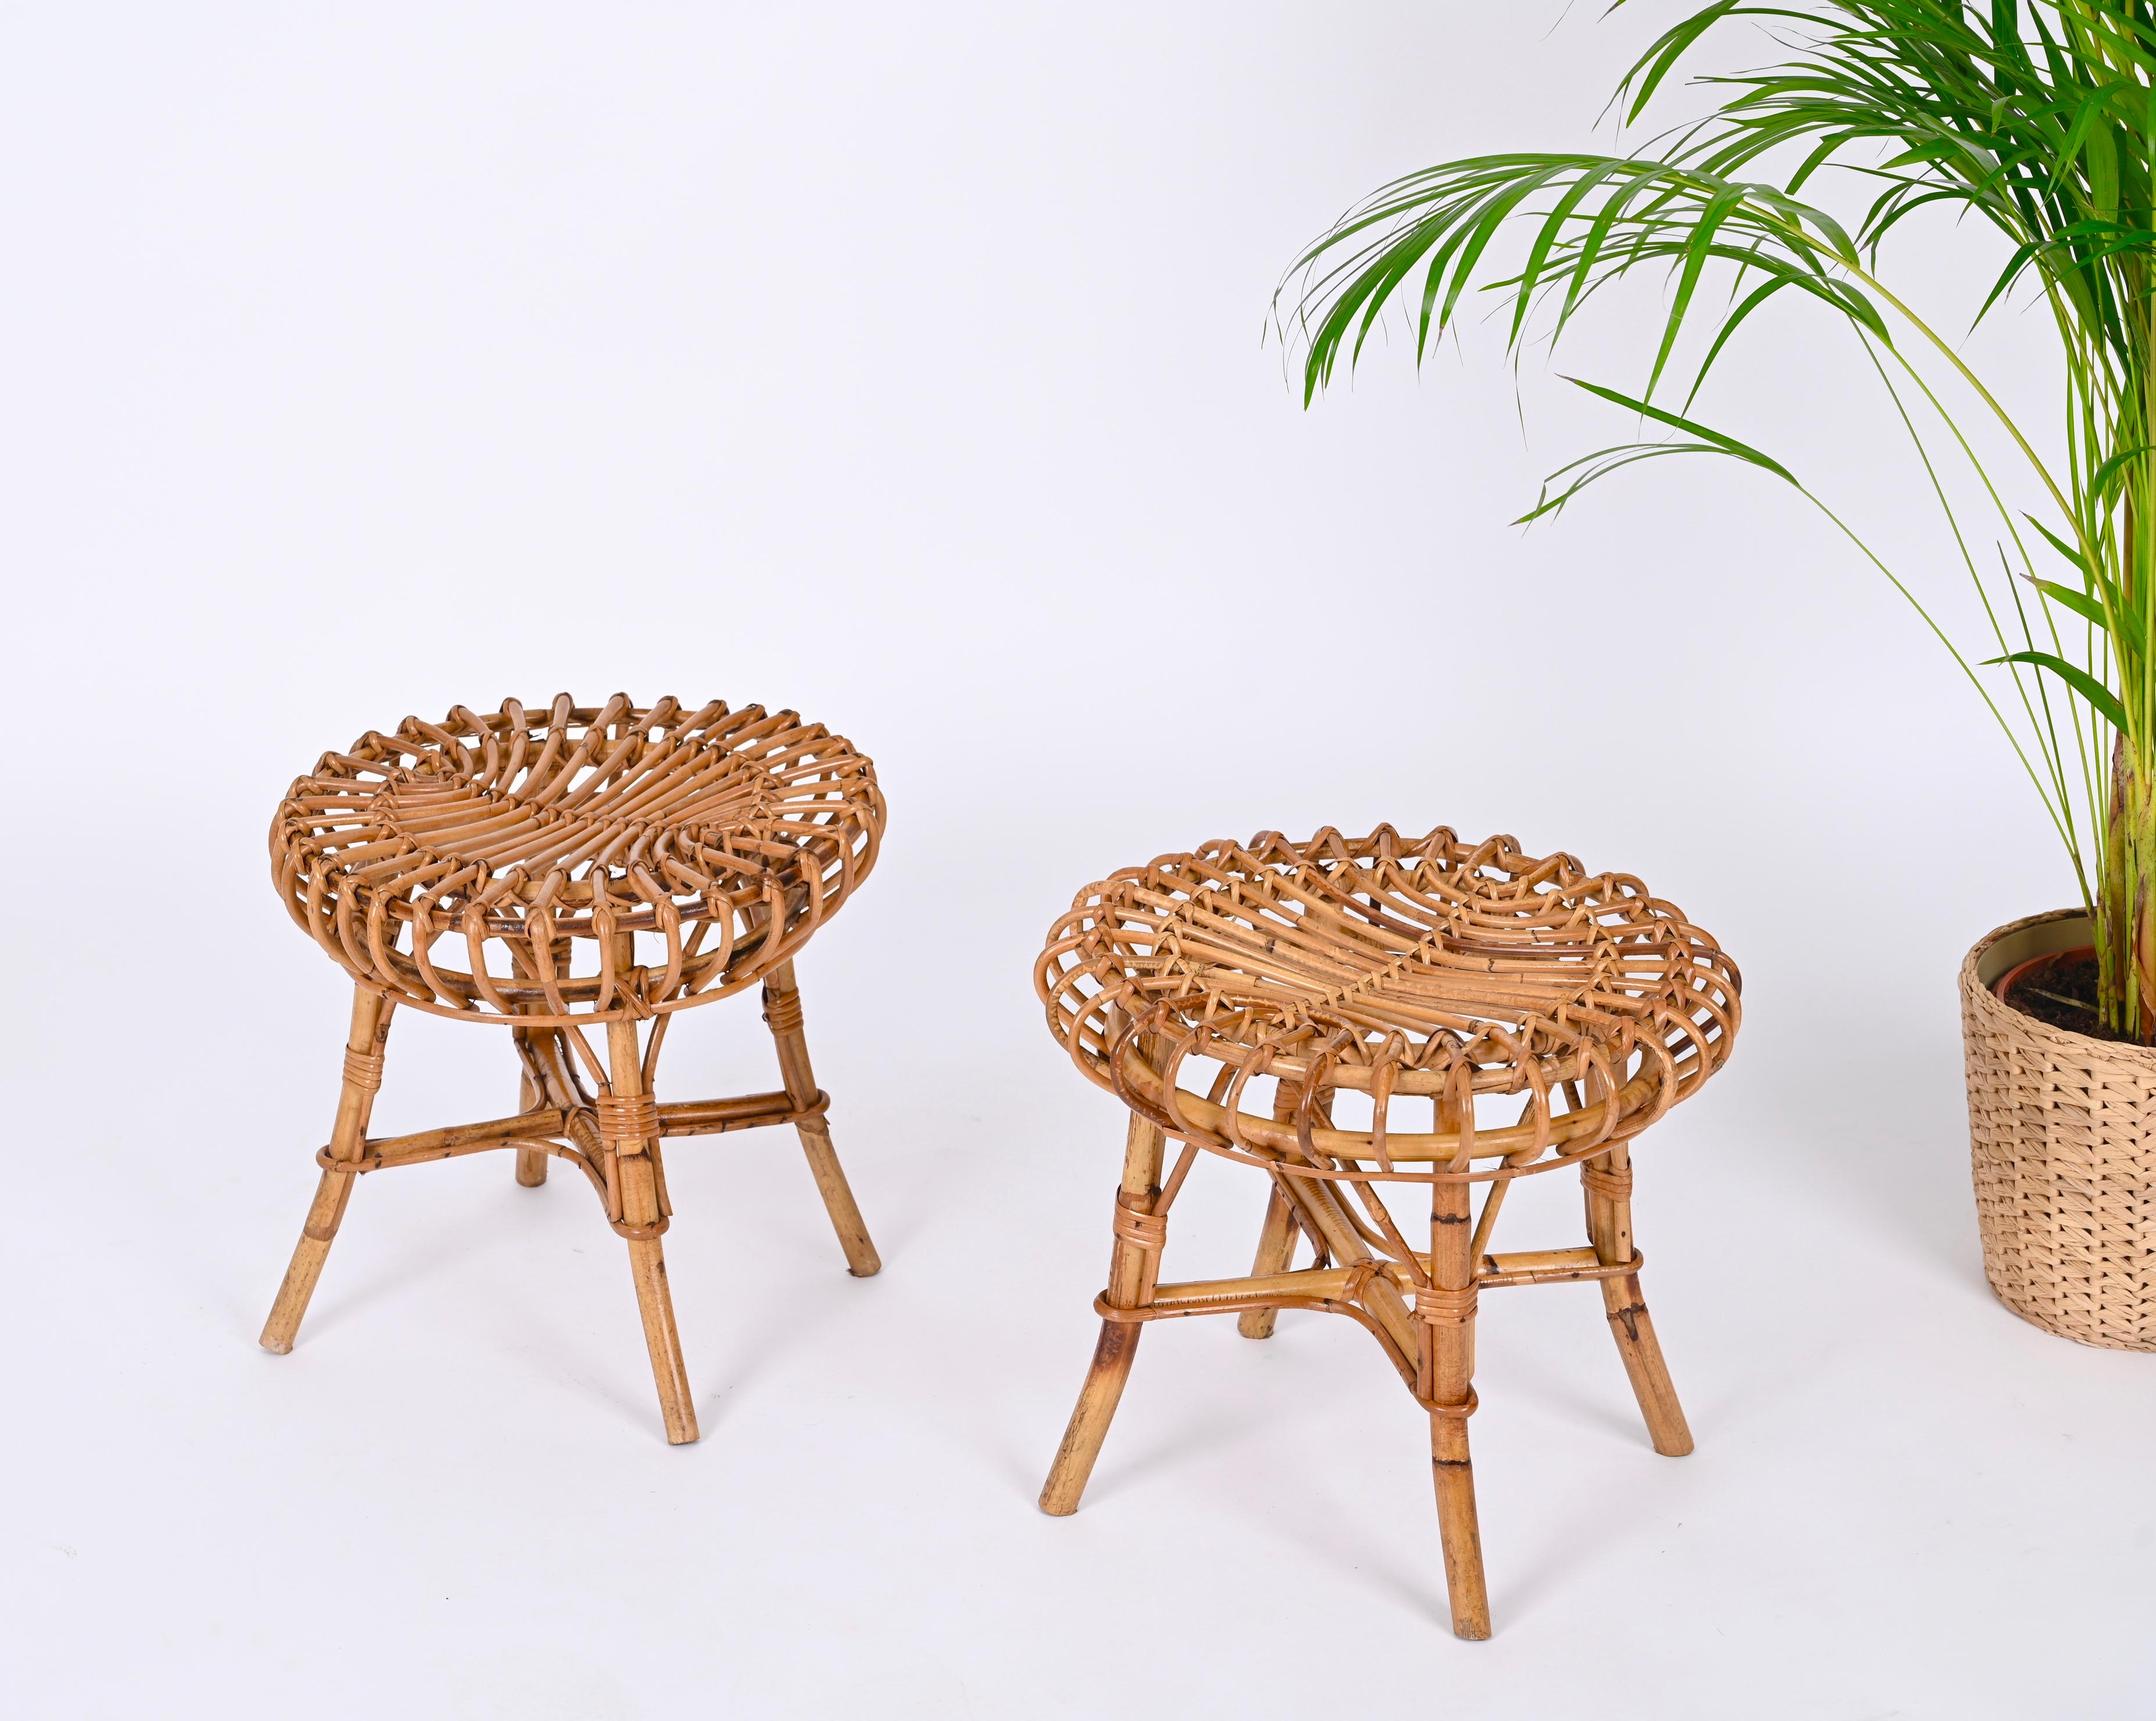 Fantastic pair of midcentury round stools in bamboo and rattan. Franco Albini designed them in Italy during the 1960s.

The poufs feature a beautiful combination of curved bamboo, rattan and wicker. Fully handcrafted with perfect proportions, this